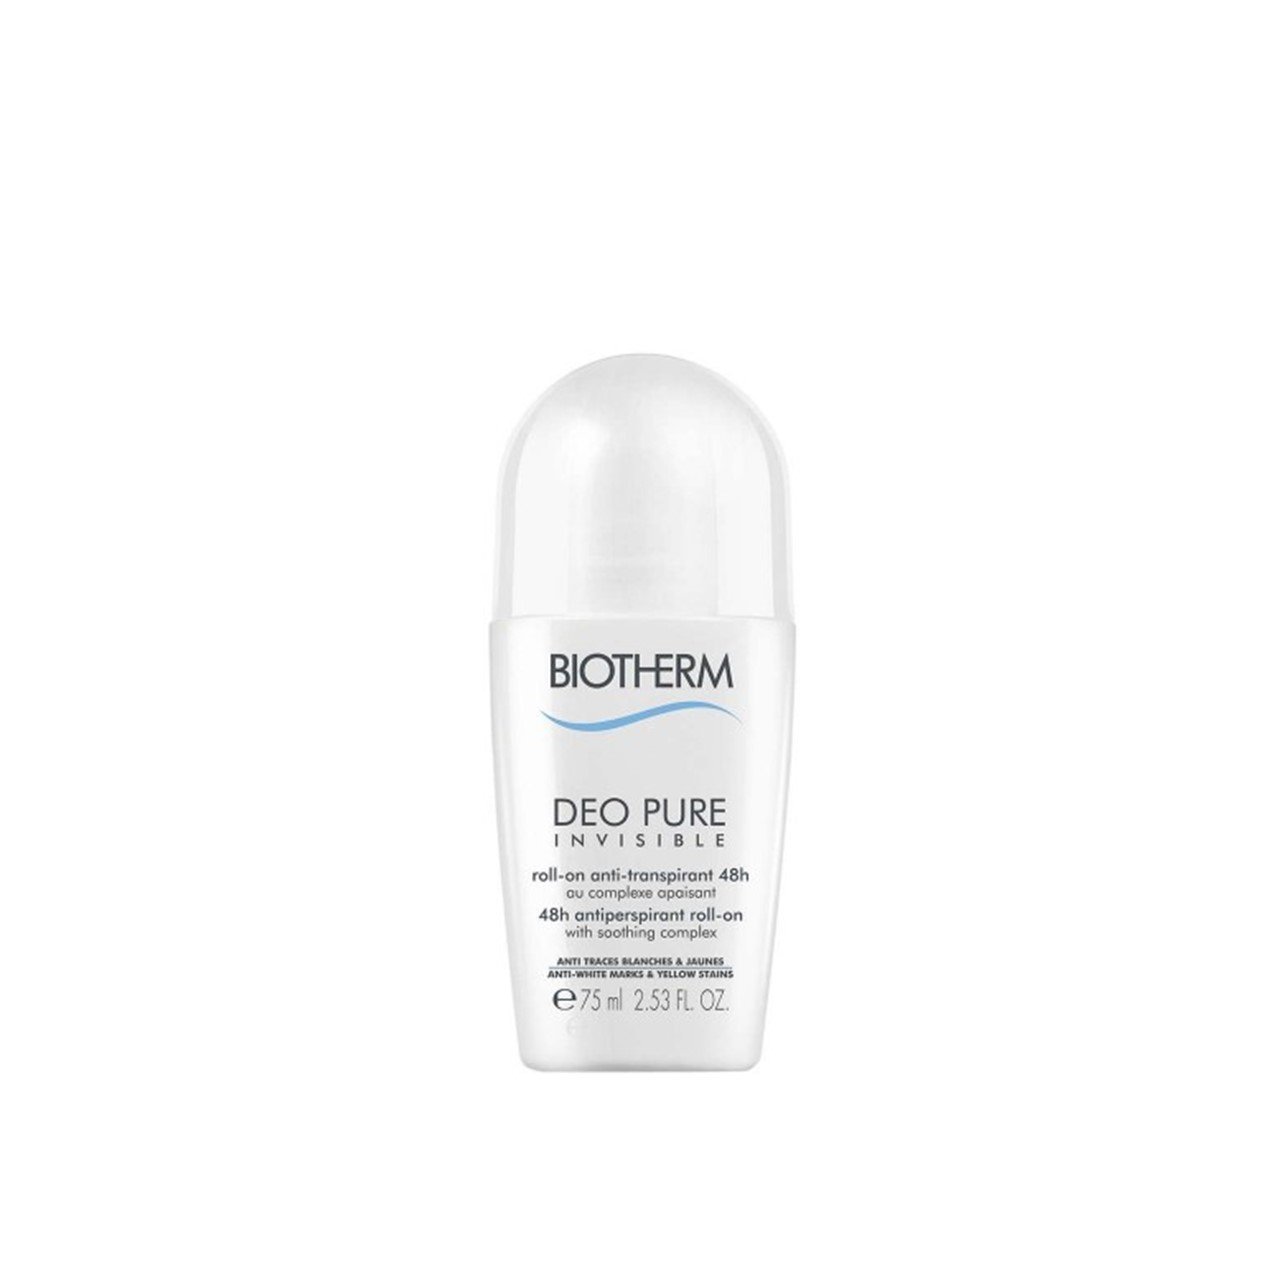 emulsie half acht Conflict Buy Biotherm Deo Pure Invisible 48h Antiperspirant Roll-On 75ml (2.54fl oz)  · USA